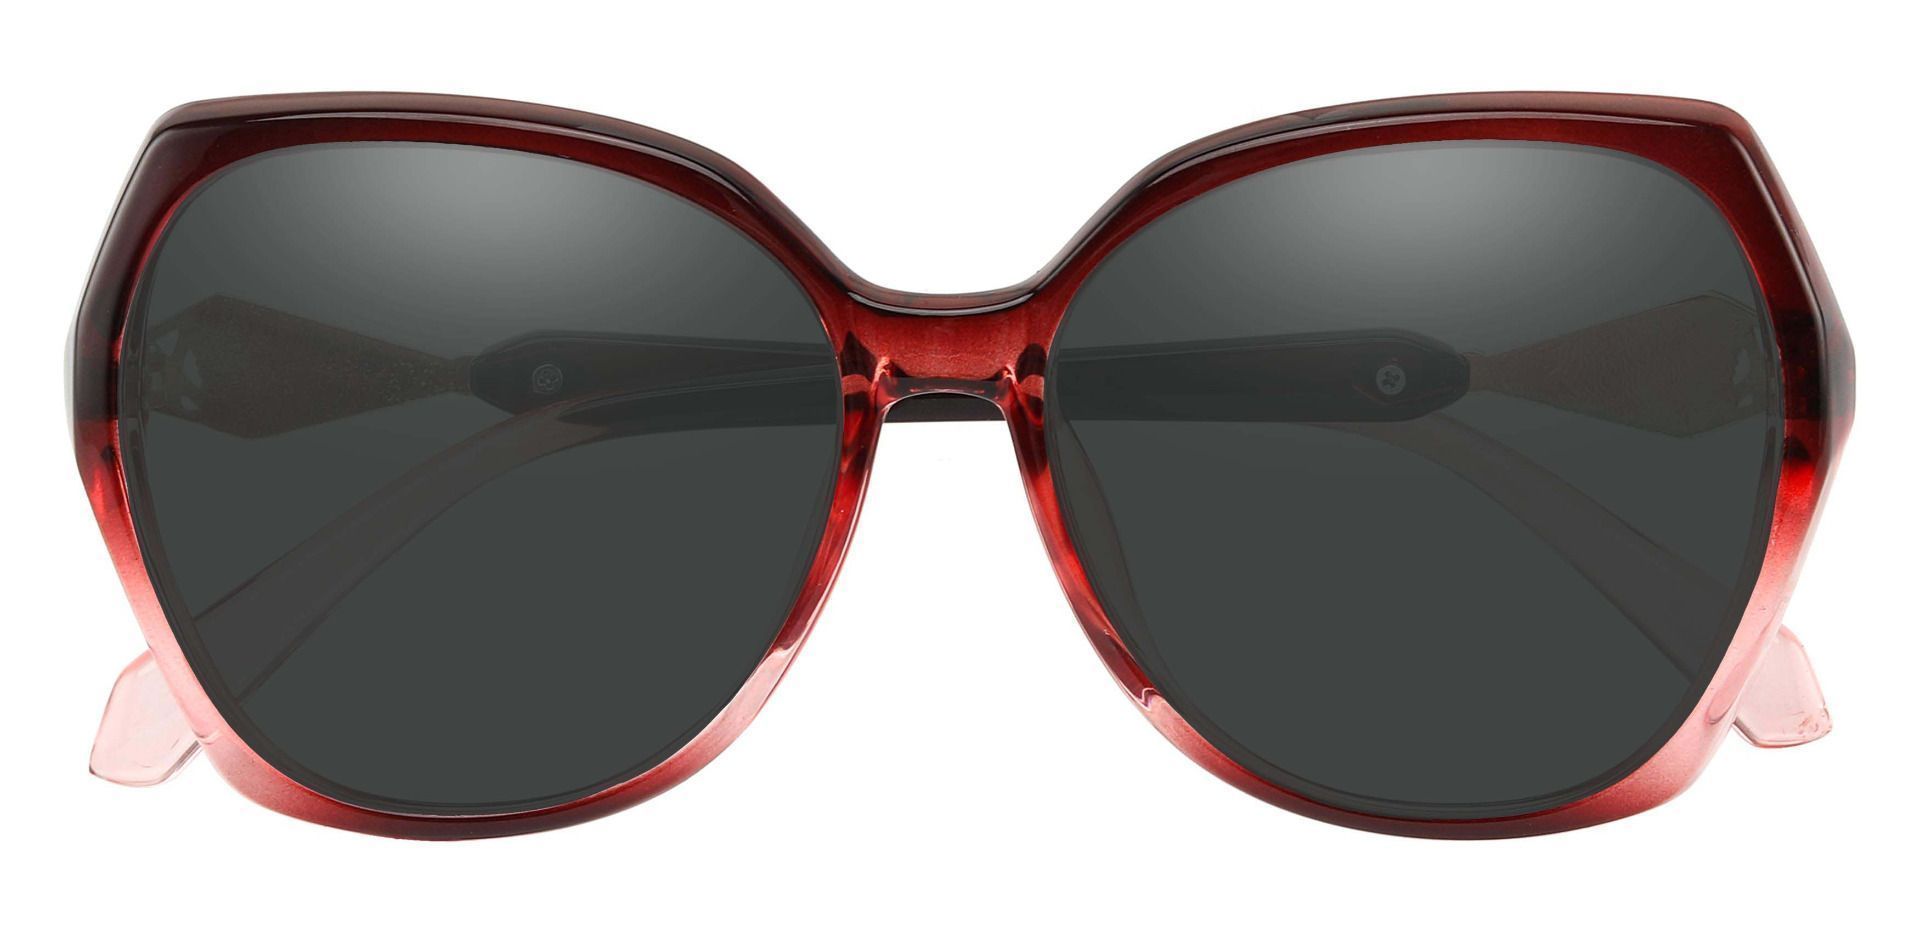 Solitaire Geometric Non-Rx Sunglasses - Red Frame With Gray Lenses